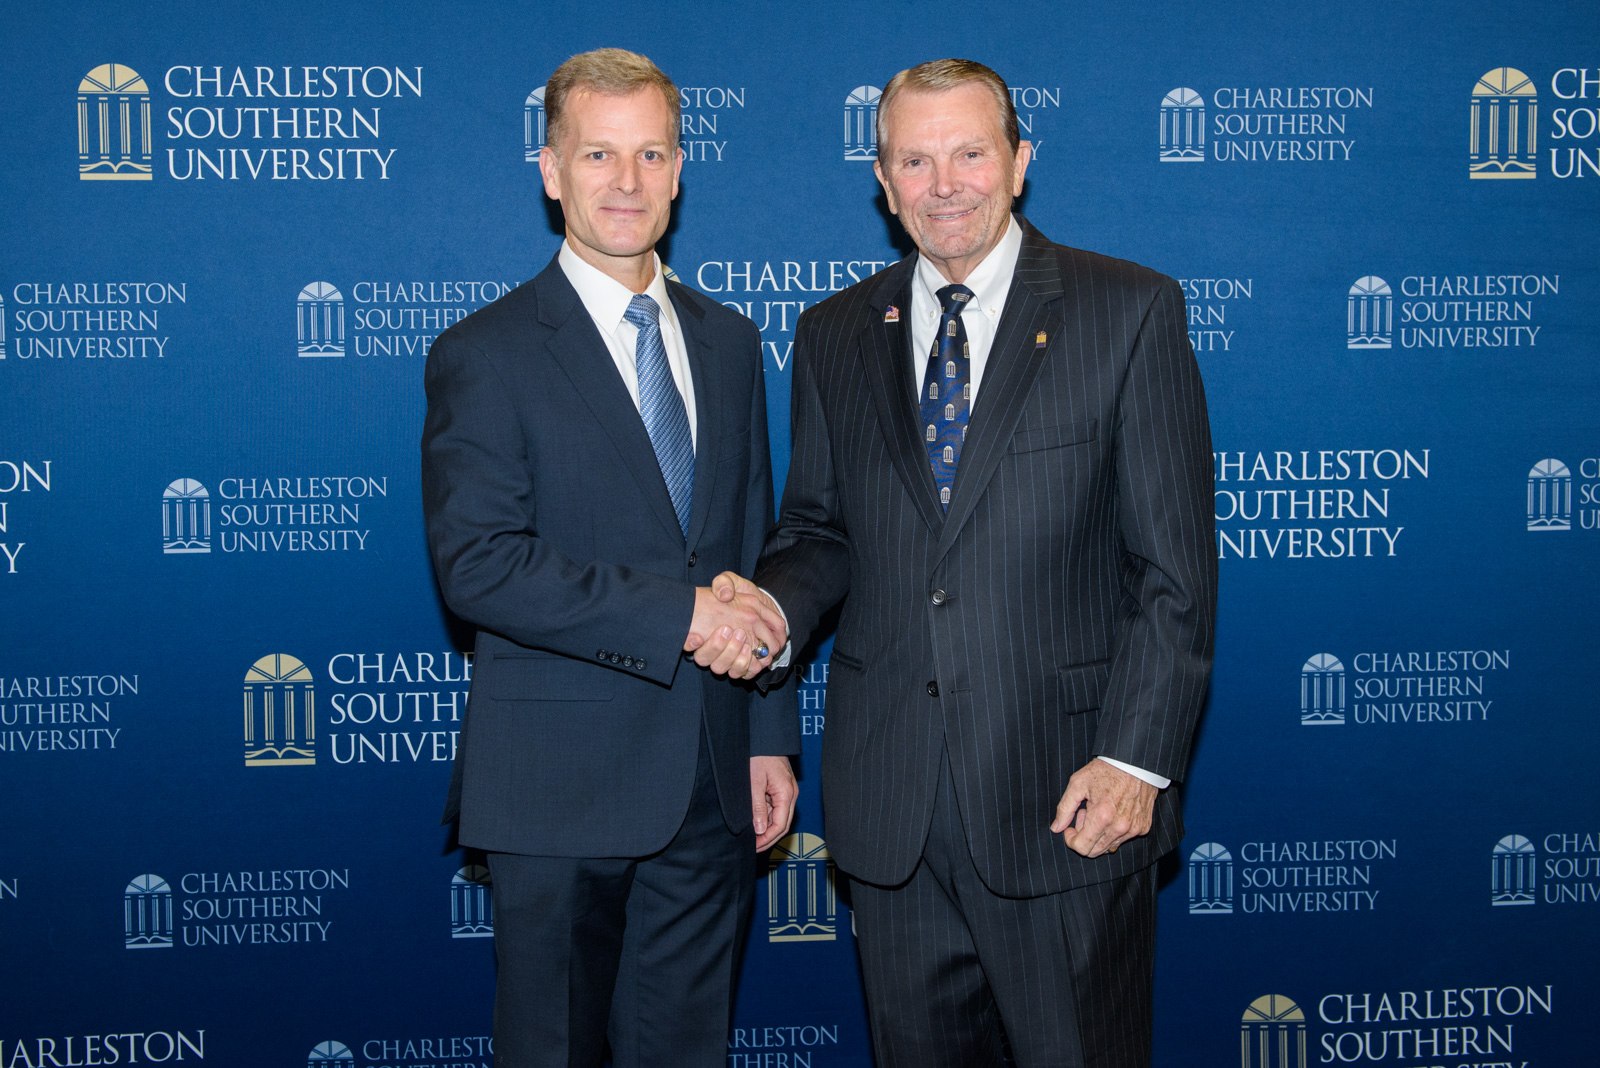 The Charleston Southern University Board of Trustees unanimously approved the appointment of Dondi E. Costin, PhD, to serve as the third president of Charleston Southern University. 